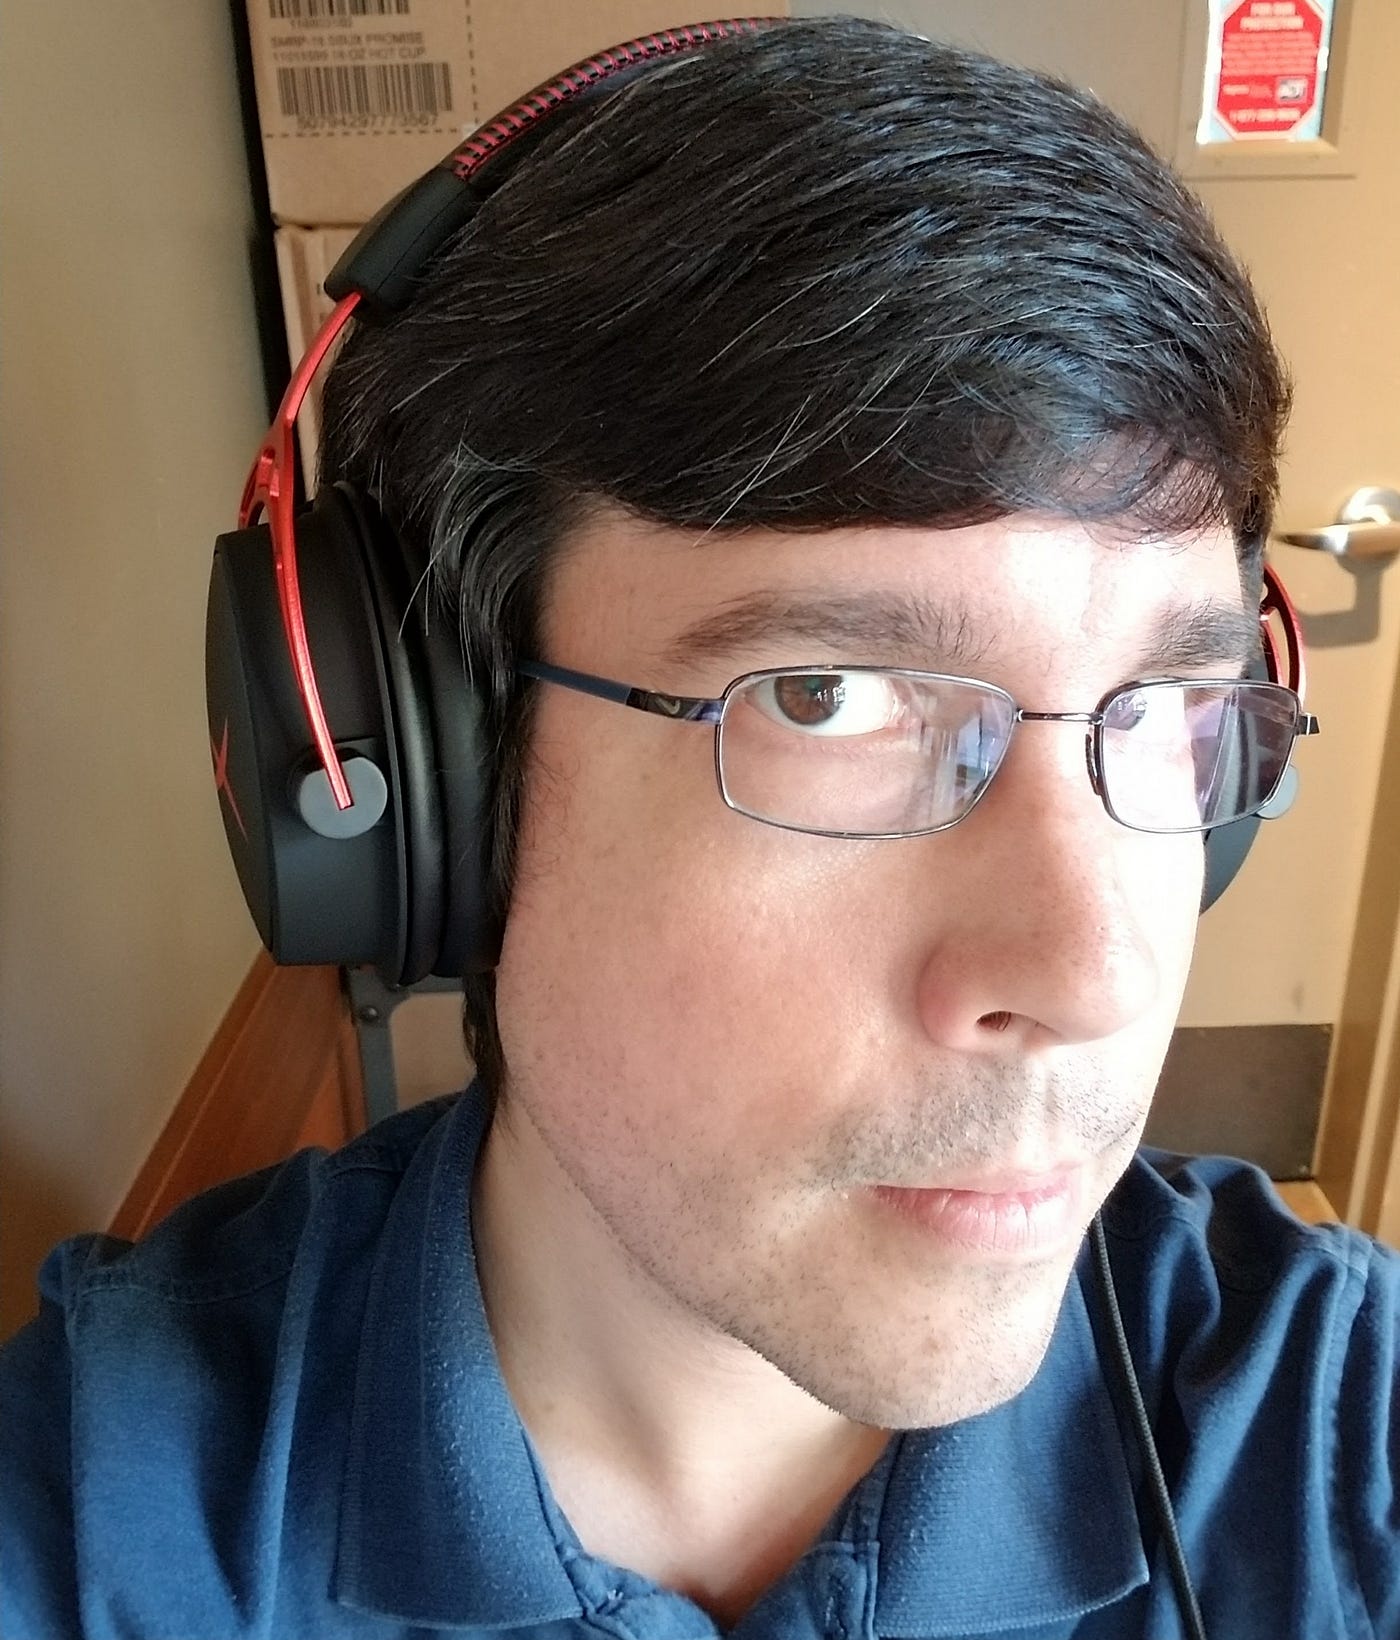 HyperX Cloud Alpha Gaming Headset Review, by Alex Rowe